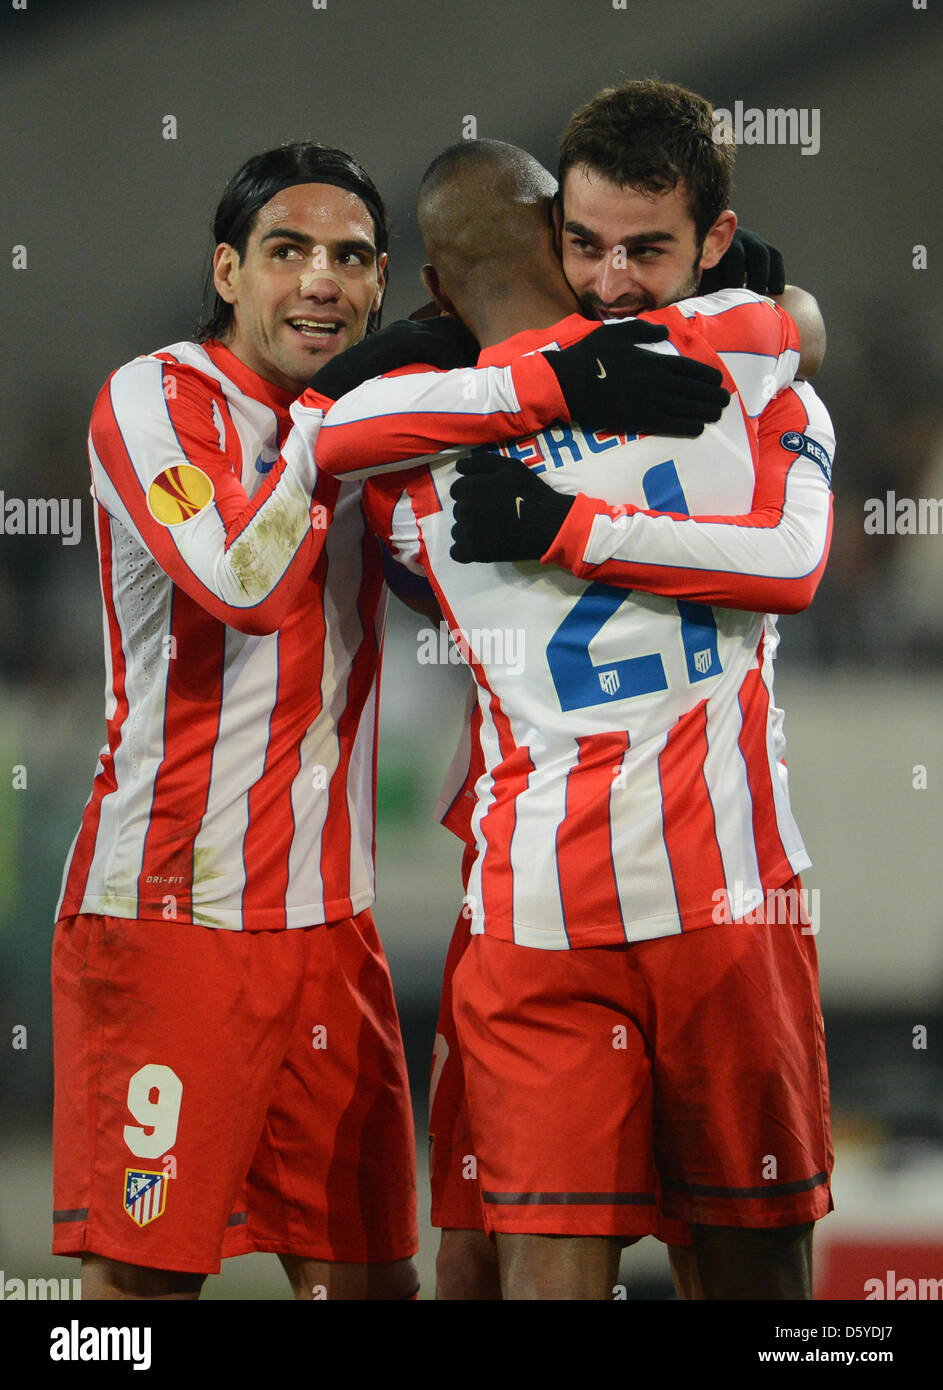 Atletico Madrid's Adrian (R) celebrates with Luis Perea (C) and Falcao after scoring the 1-0 during their UEFA Europa League quarter-final first leg soccer match between Hanover 96 and Atletico Madrid at AWD-Arena in Hanover, Germany, 05 April 2012. Photo: Peter Steffen dpa/lni  +++(c) dpa - Bildfunk+++ Stock Photo